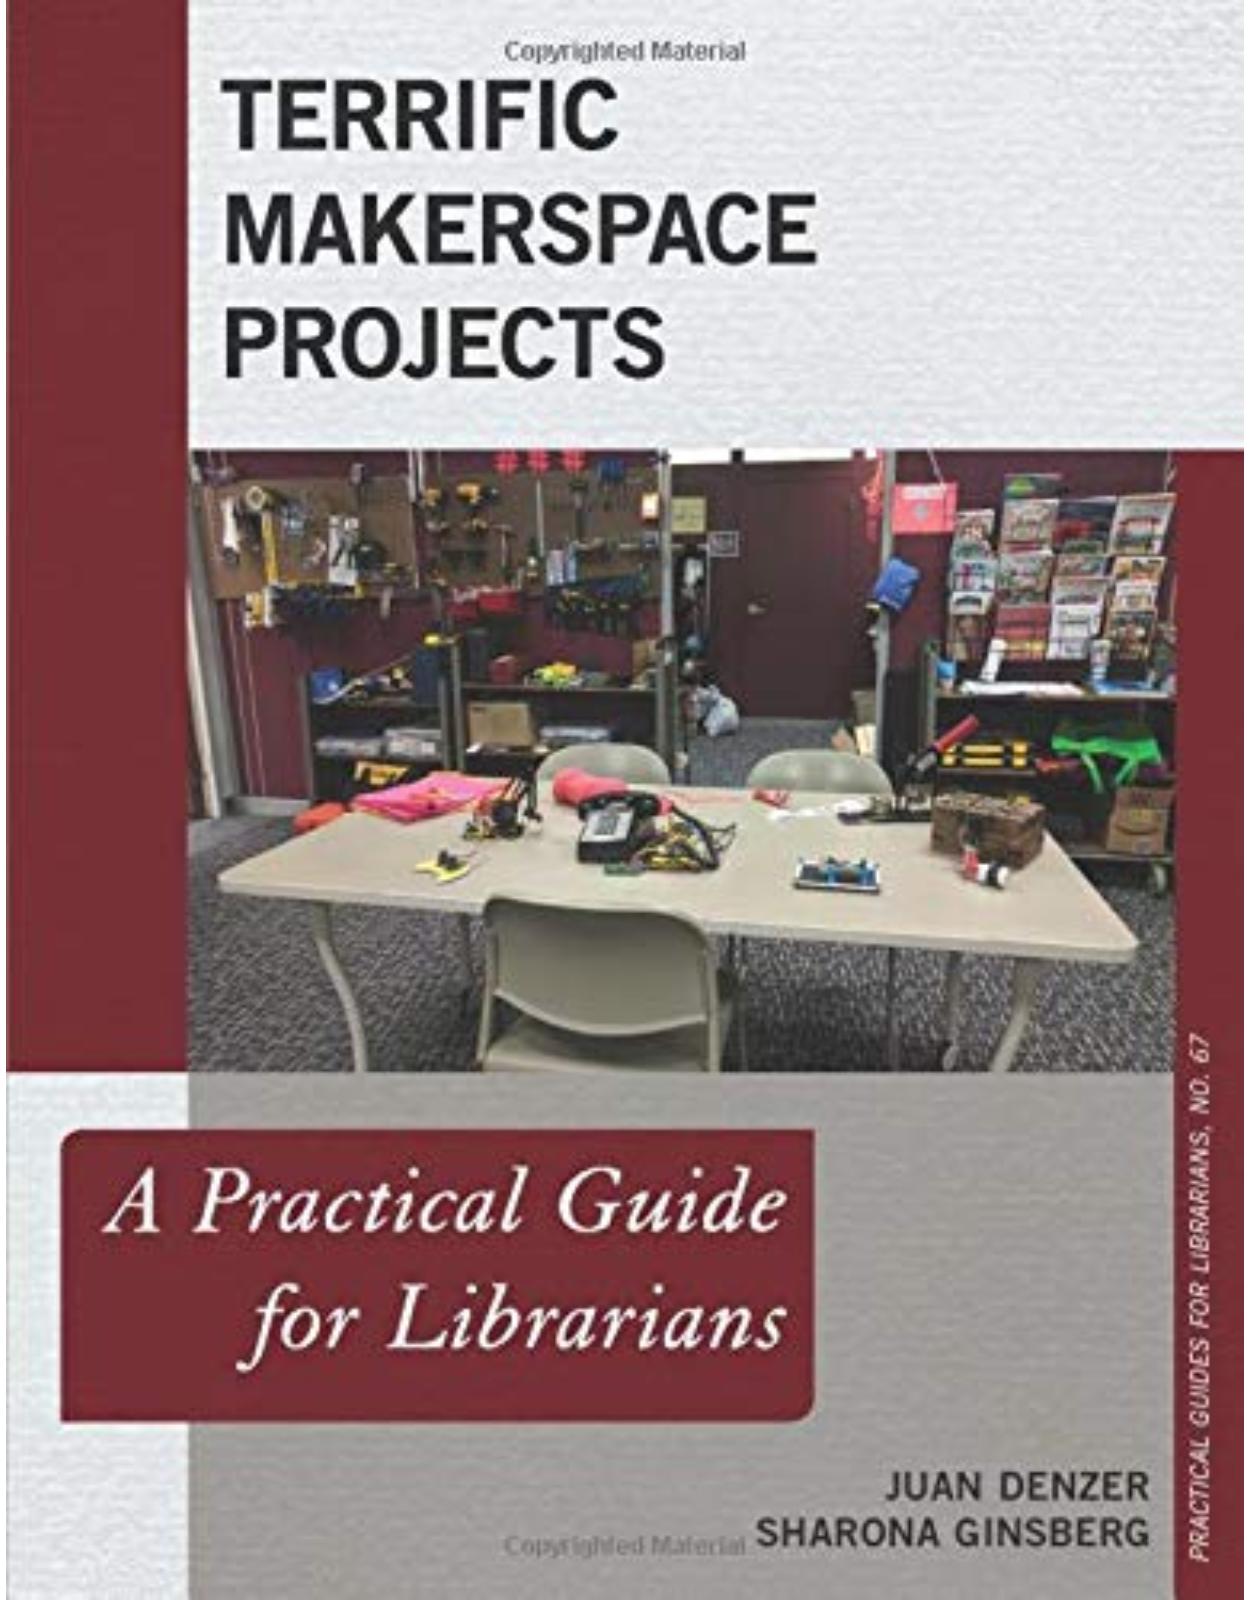 Terrific Makerspace Projects: A Practical Guide for Librarians: 67